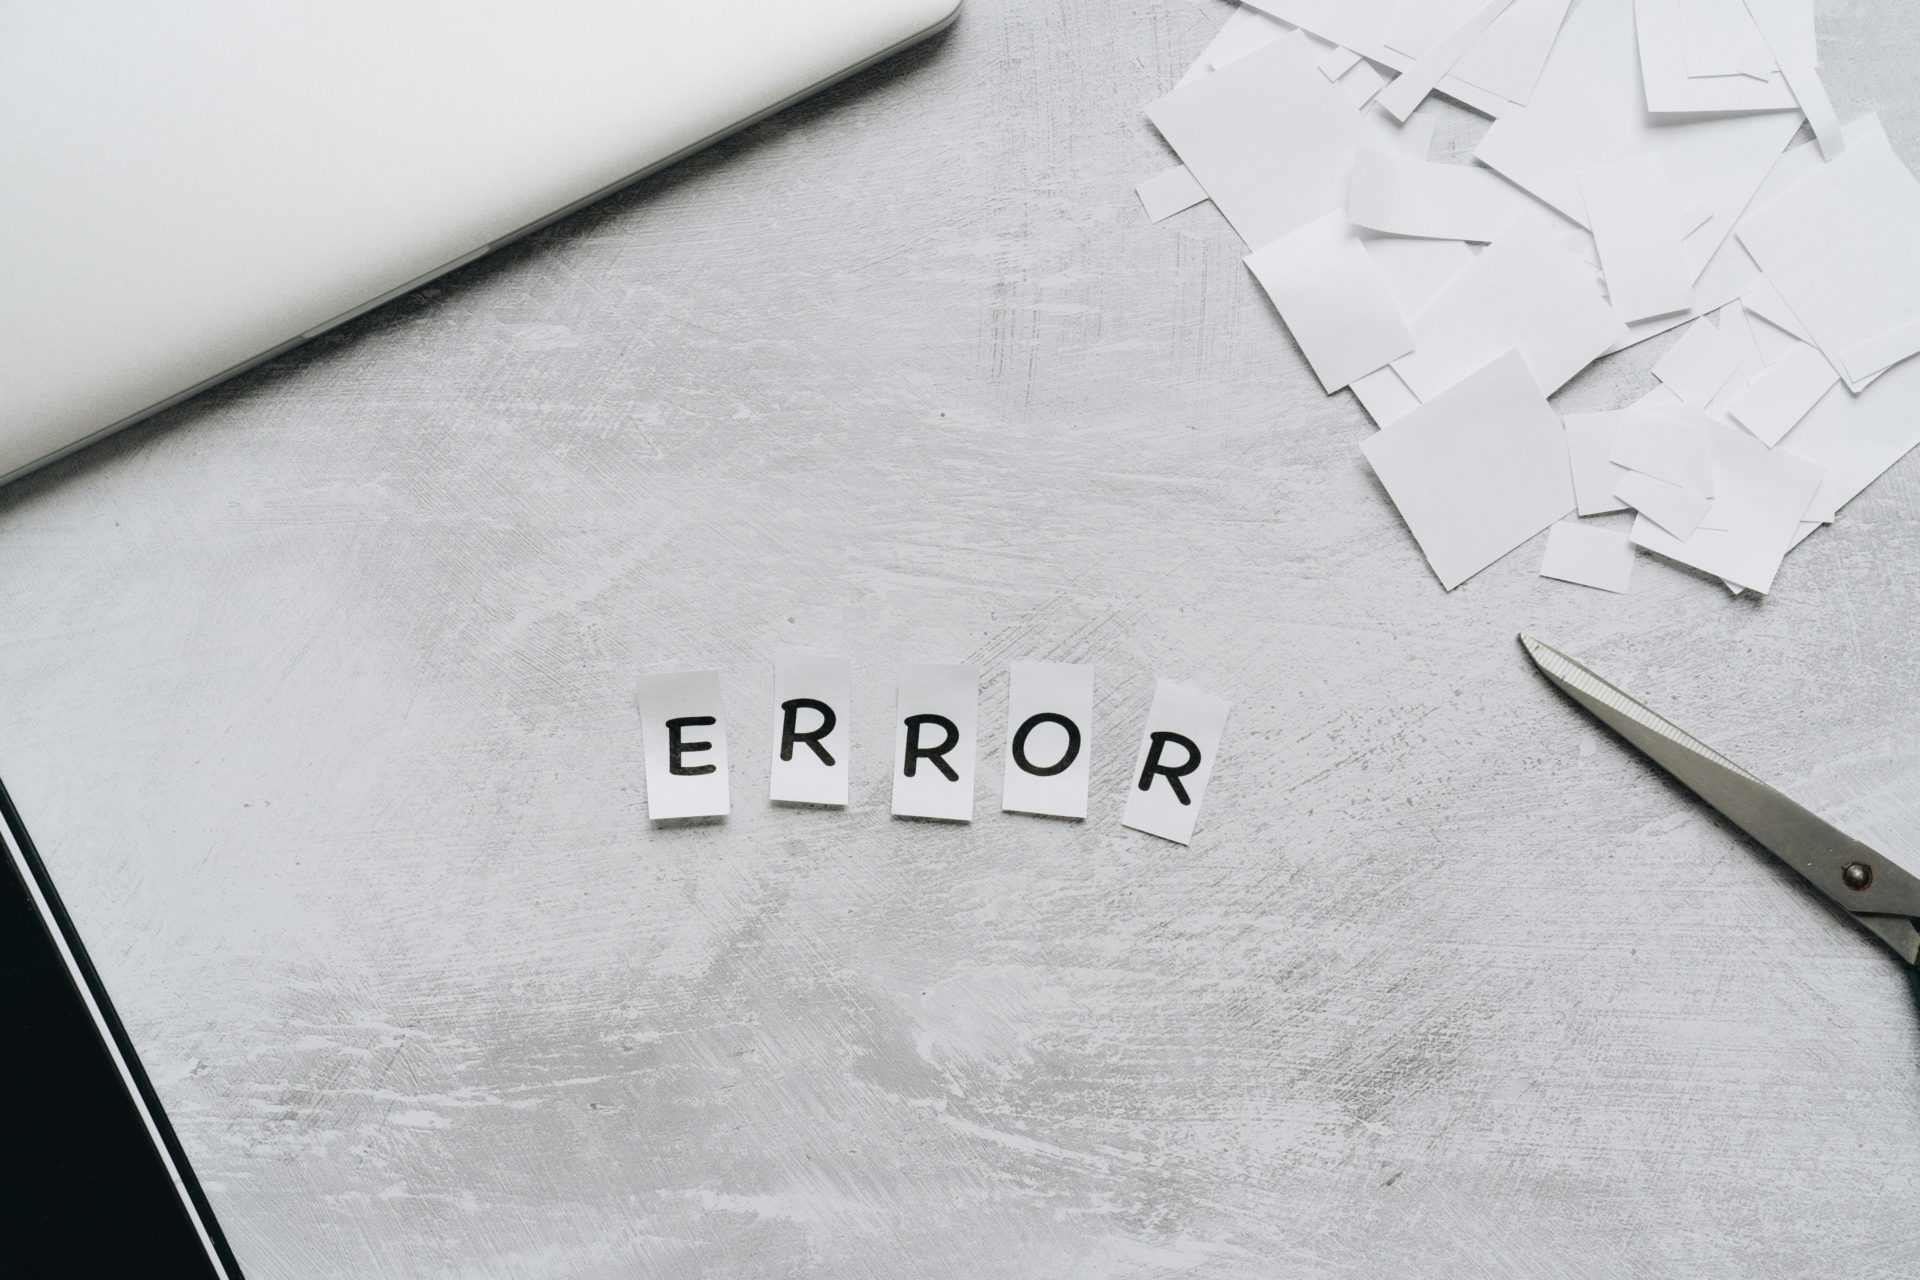 Credit Report Errors: Are They Common?